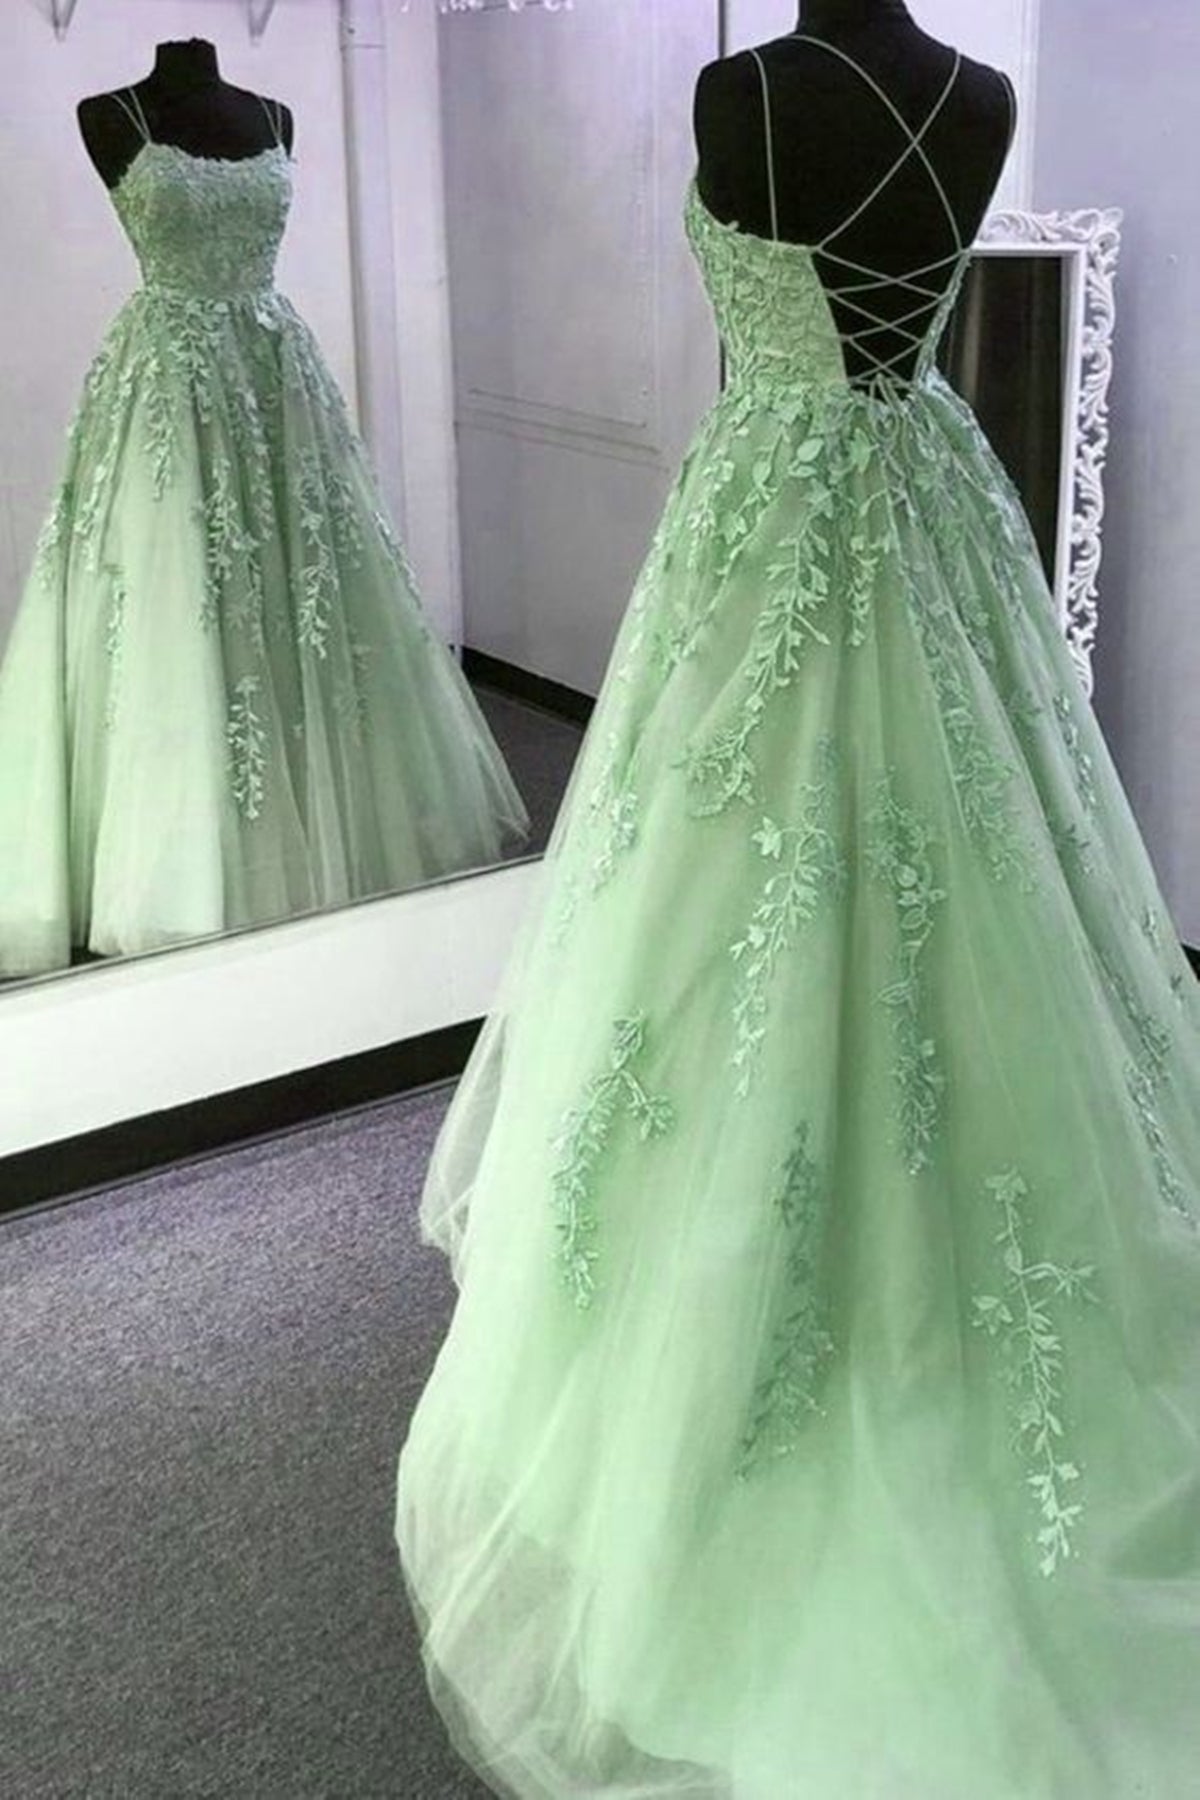 Backless Mint Green Lace Prom Dresses, Mint Green Open Back Lace Formal Evening Dresses